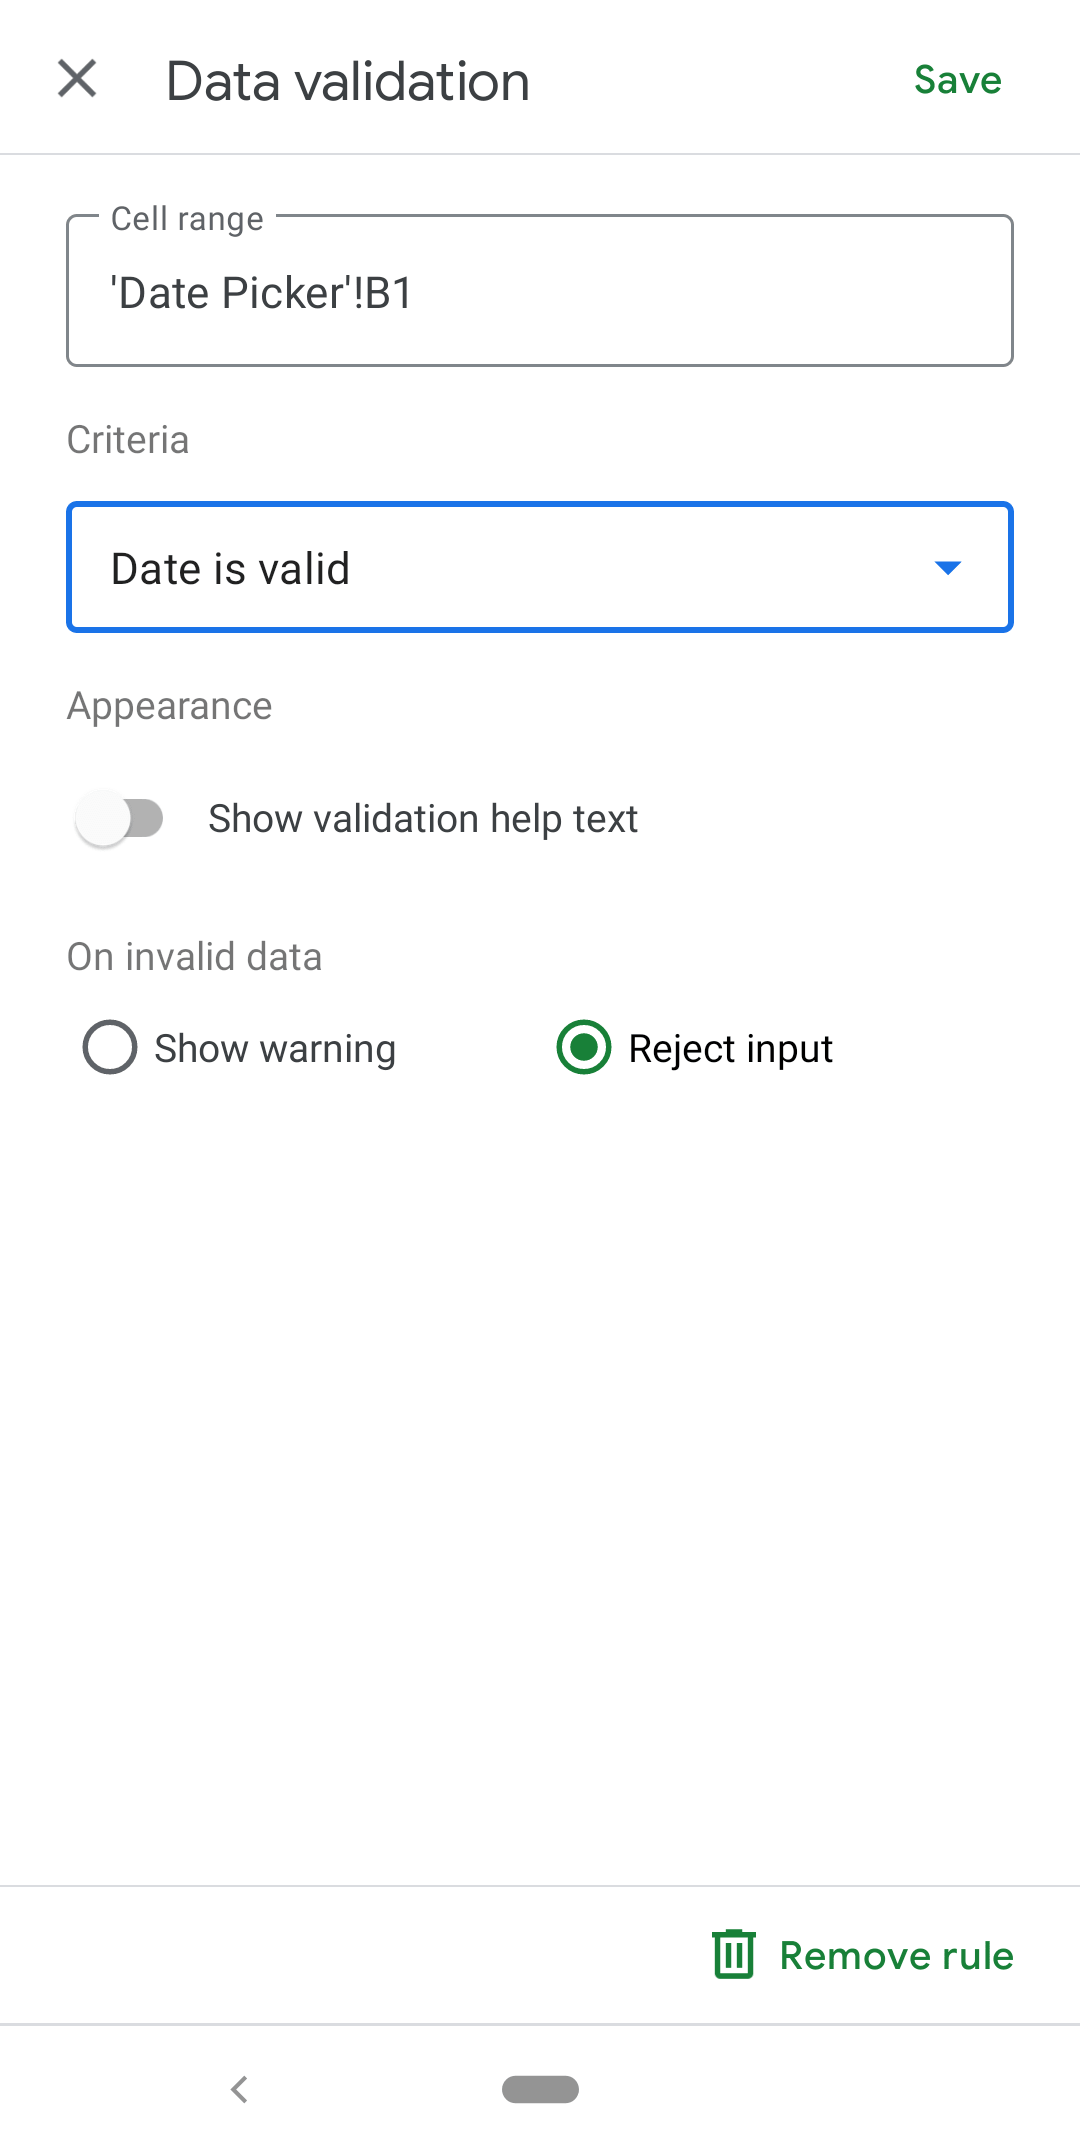 shows a correctly completed data validation menu that will result in a date picker being inserted into the sheet in the android app